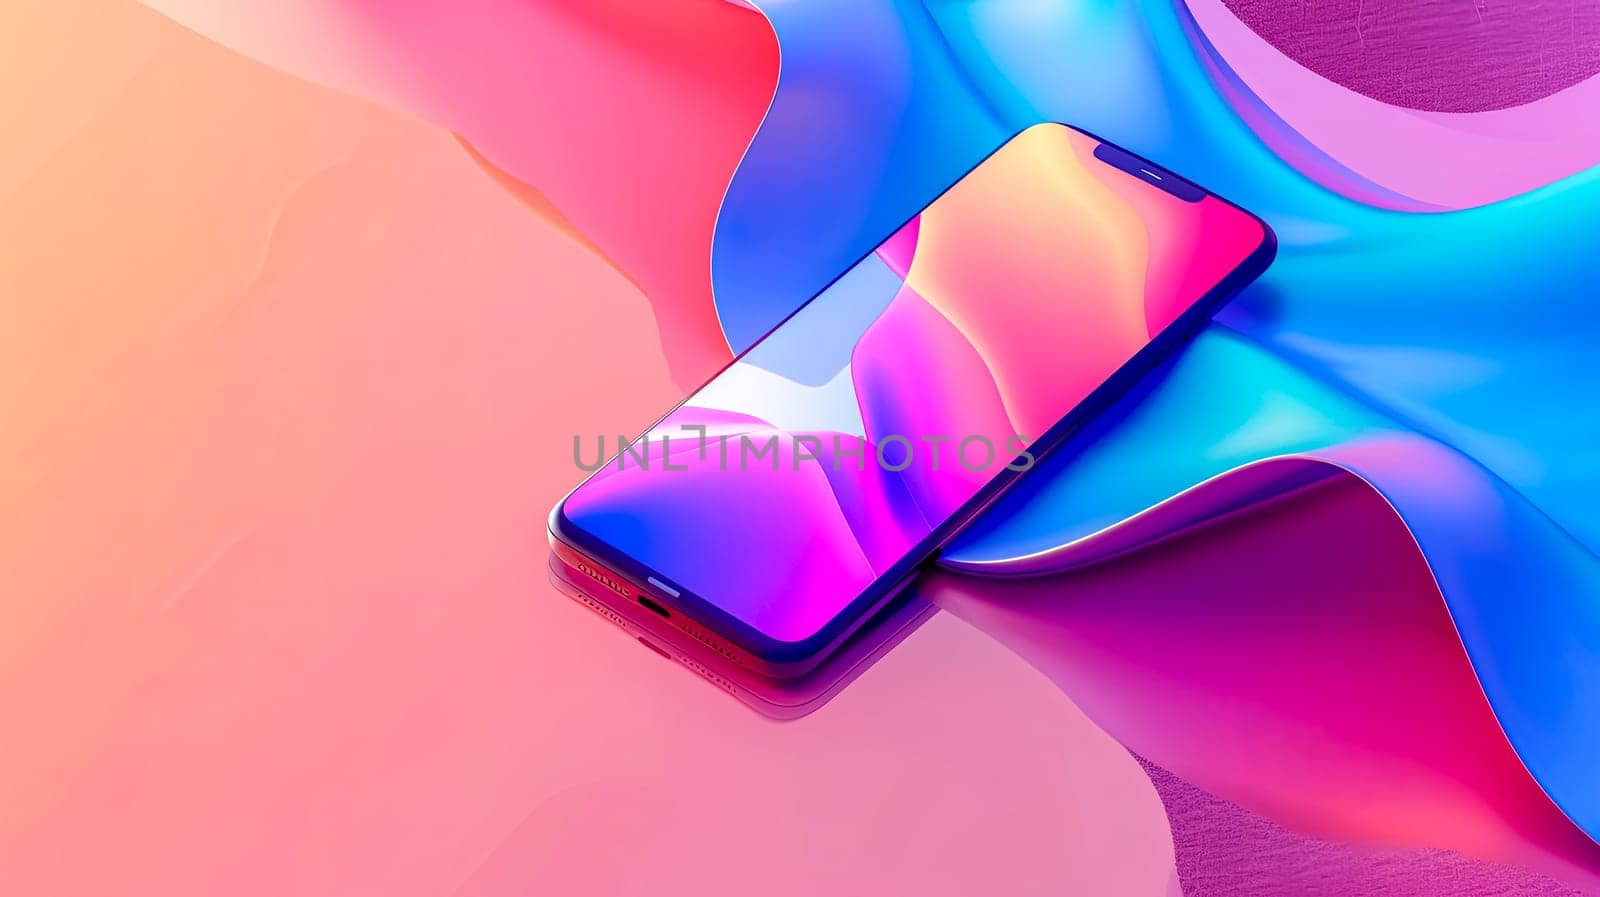 Modern Smartphone on Abstract Colorful Background by Edophoto